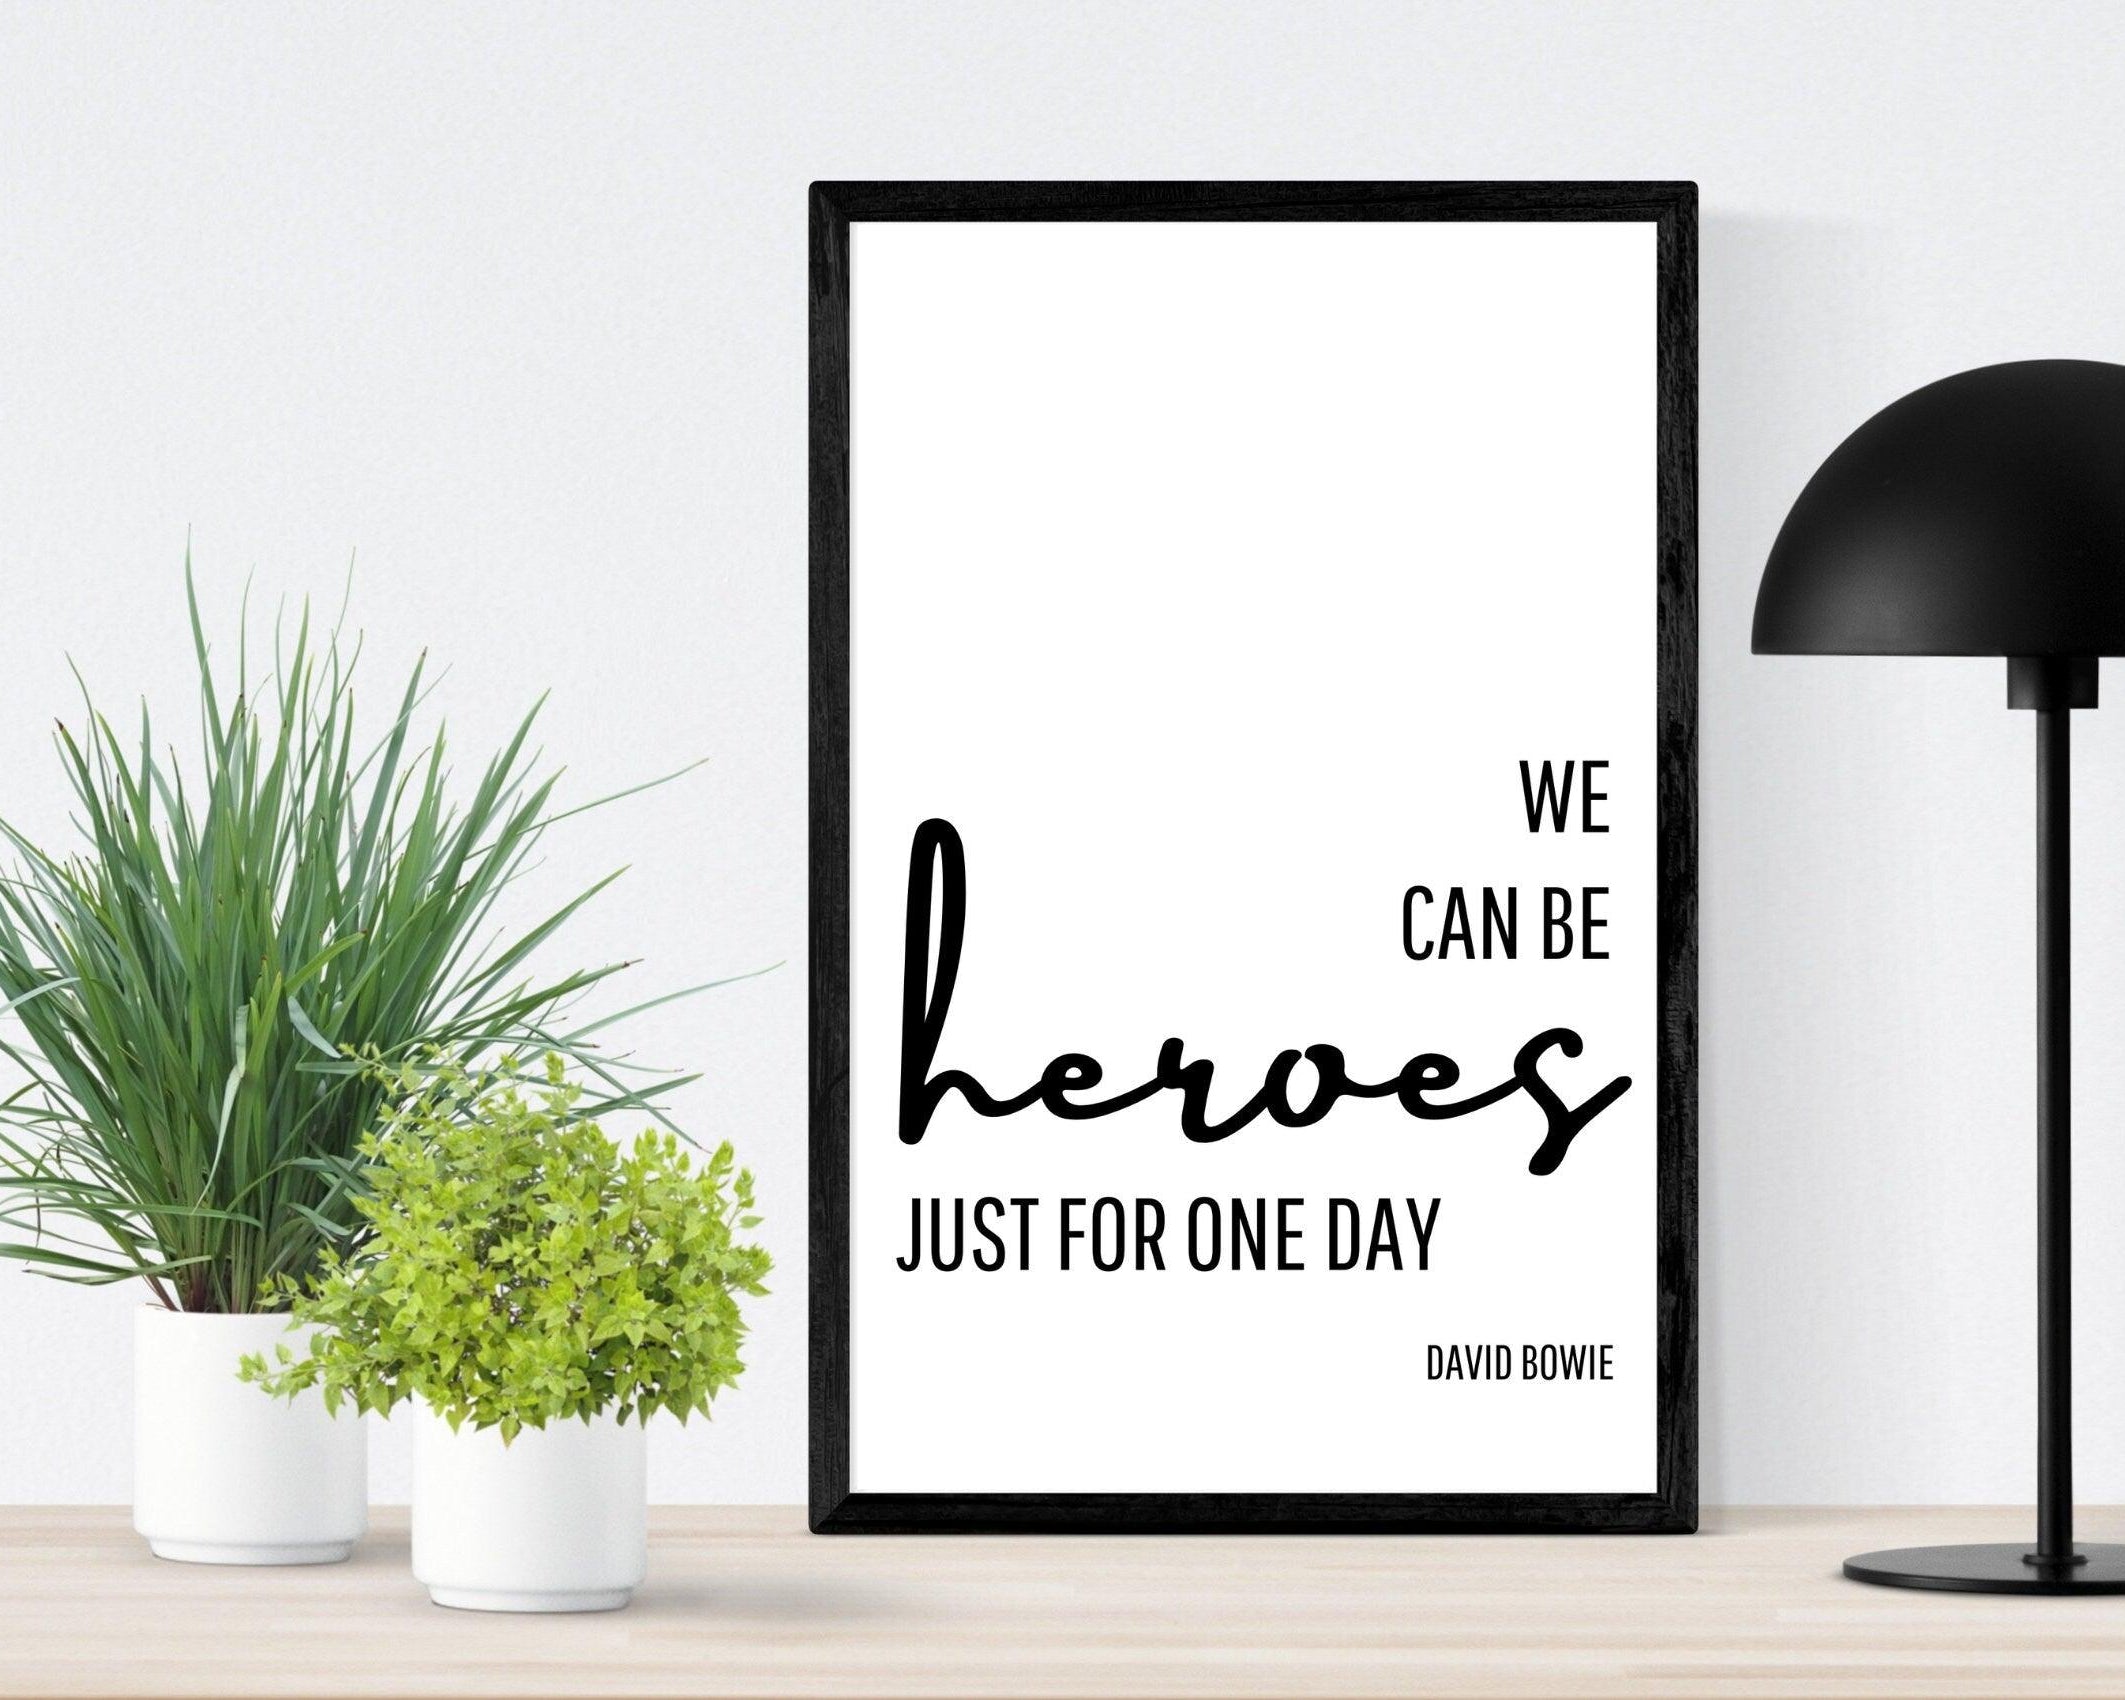 Poster Songtext | Heroes | David Bowie - Roo's Gift Shop